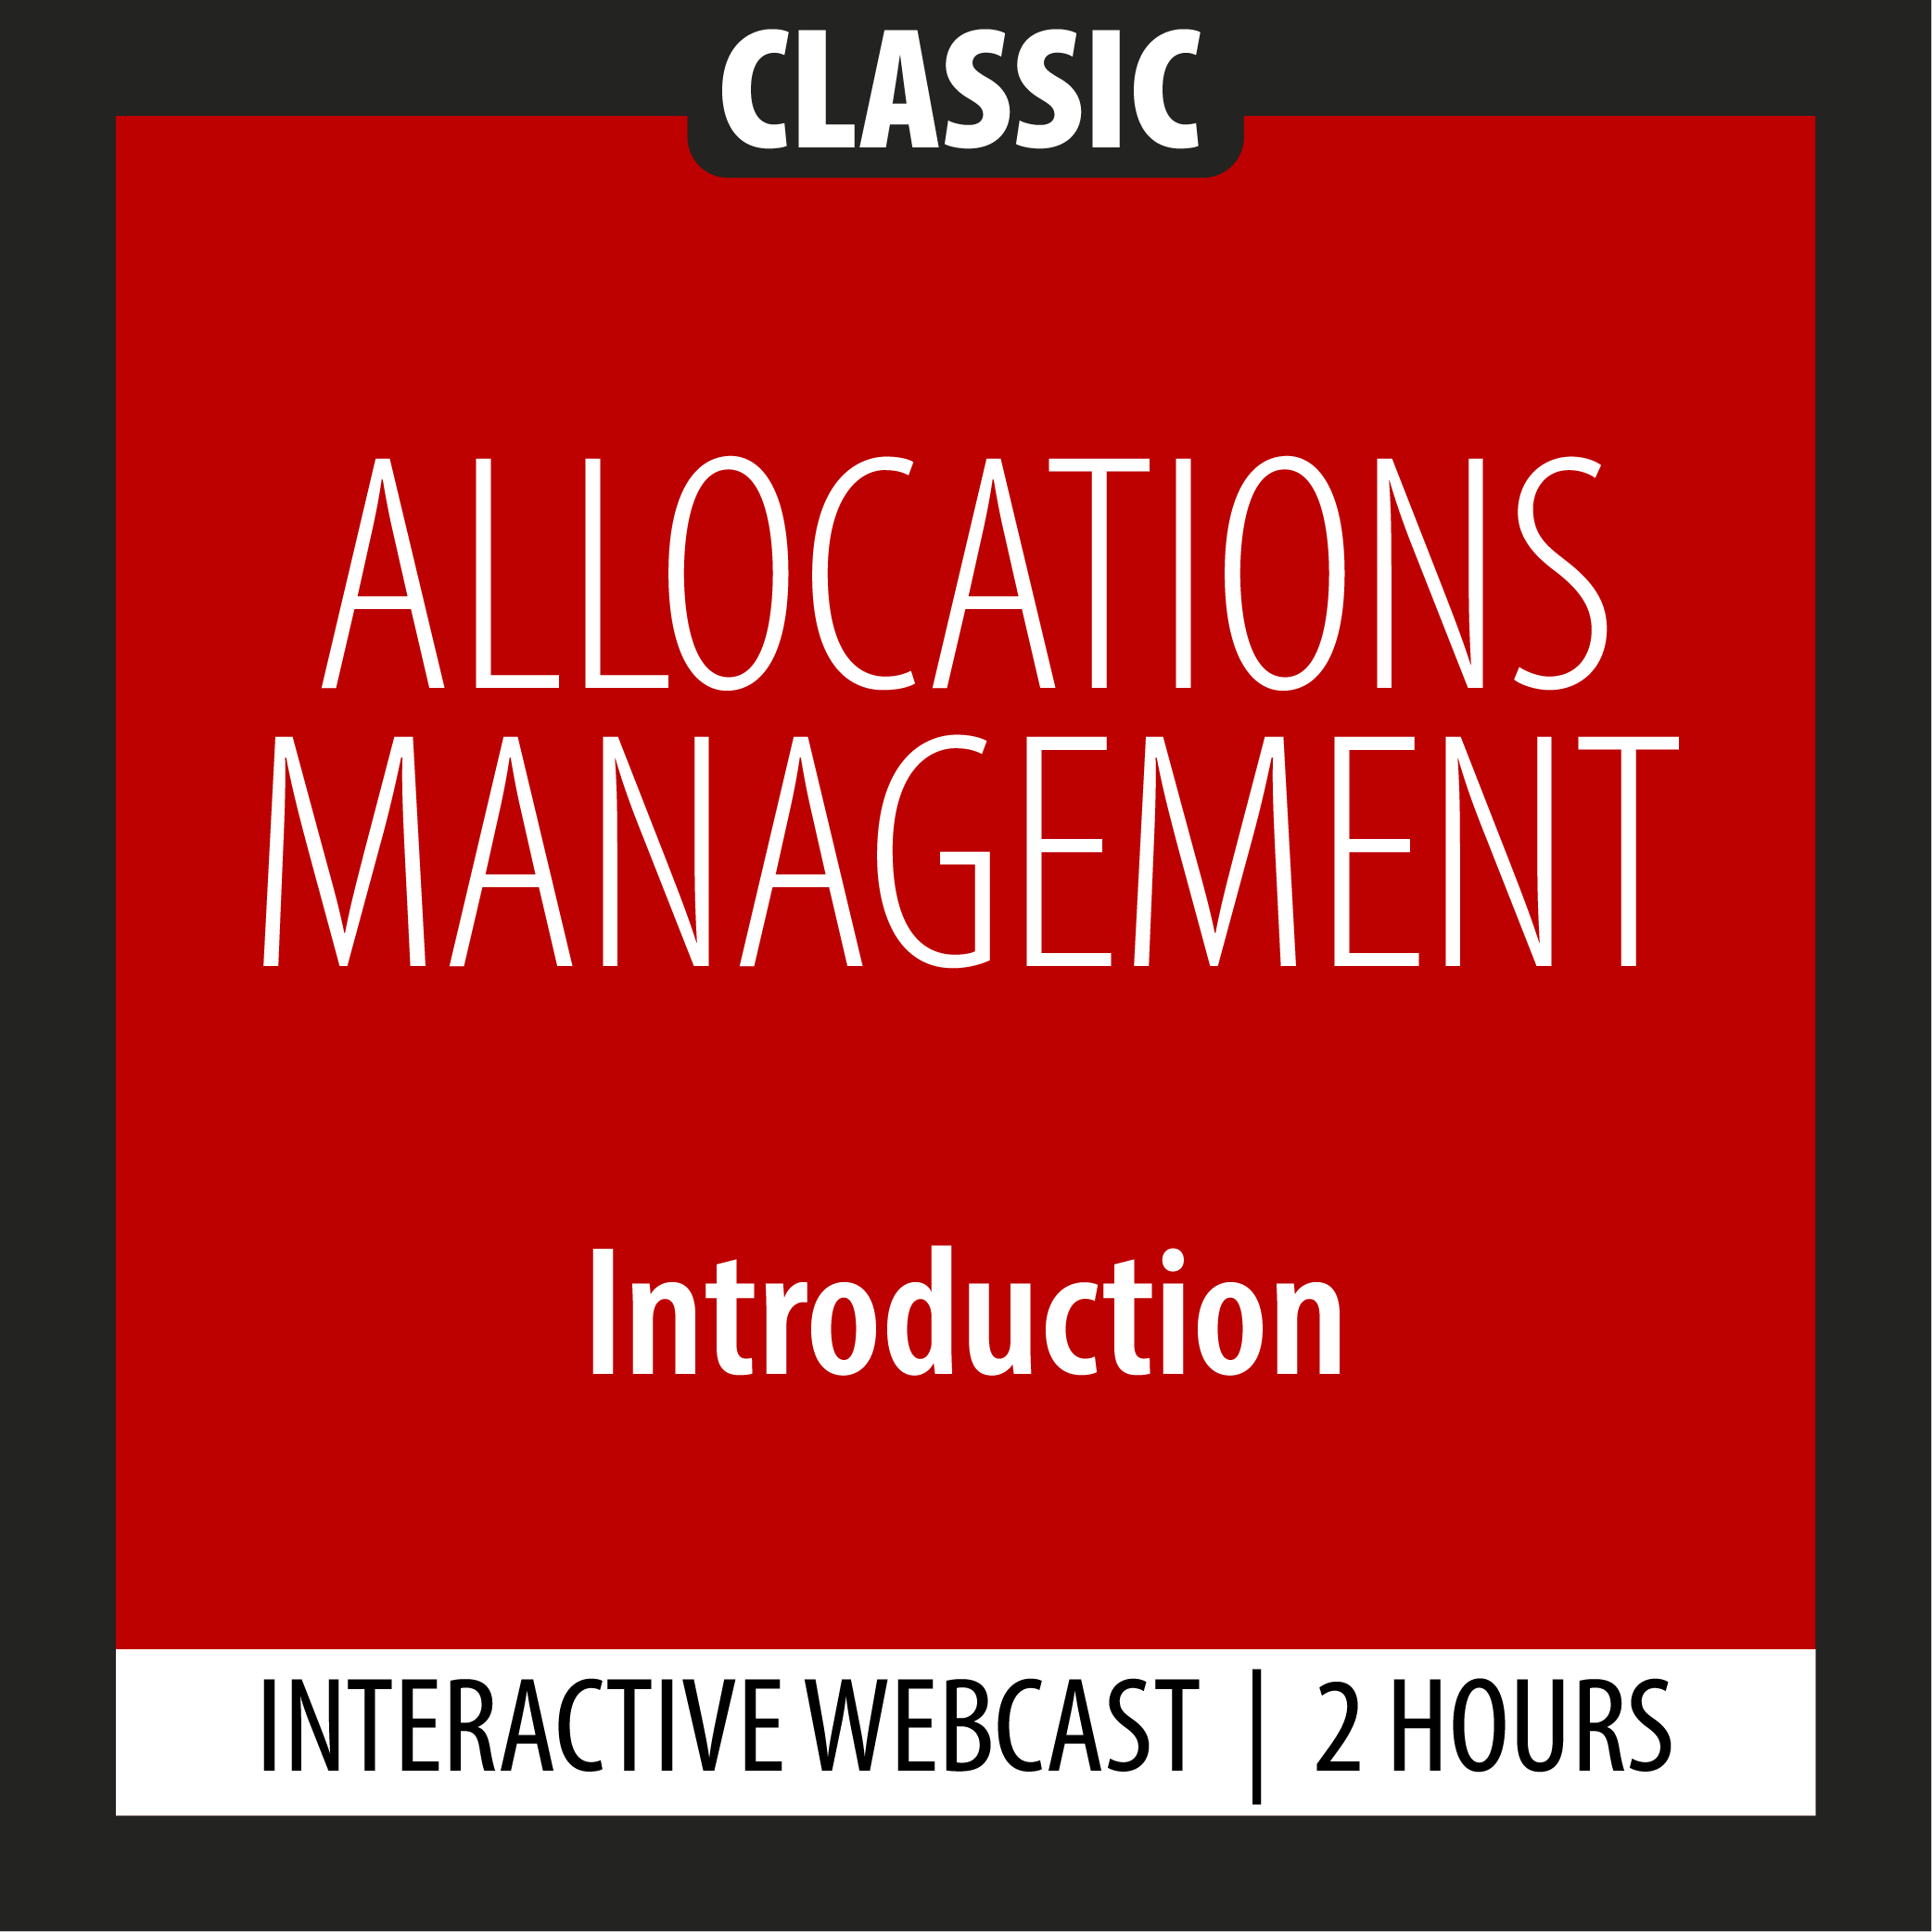 Classic - Allocations Management - Introduction - Webcast - 2 Hours